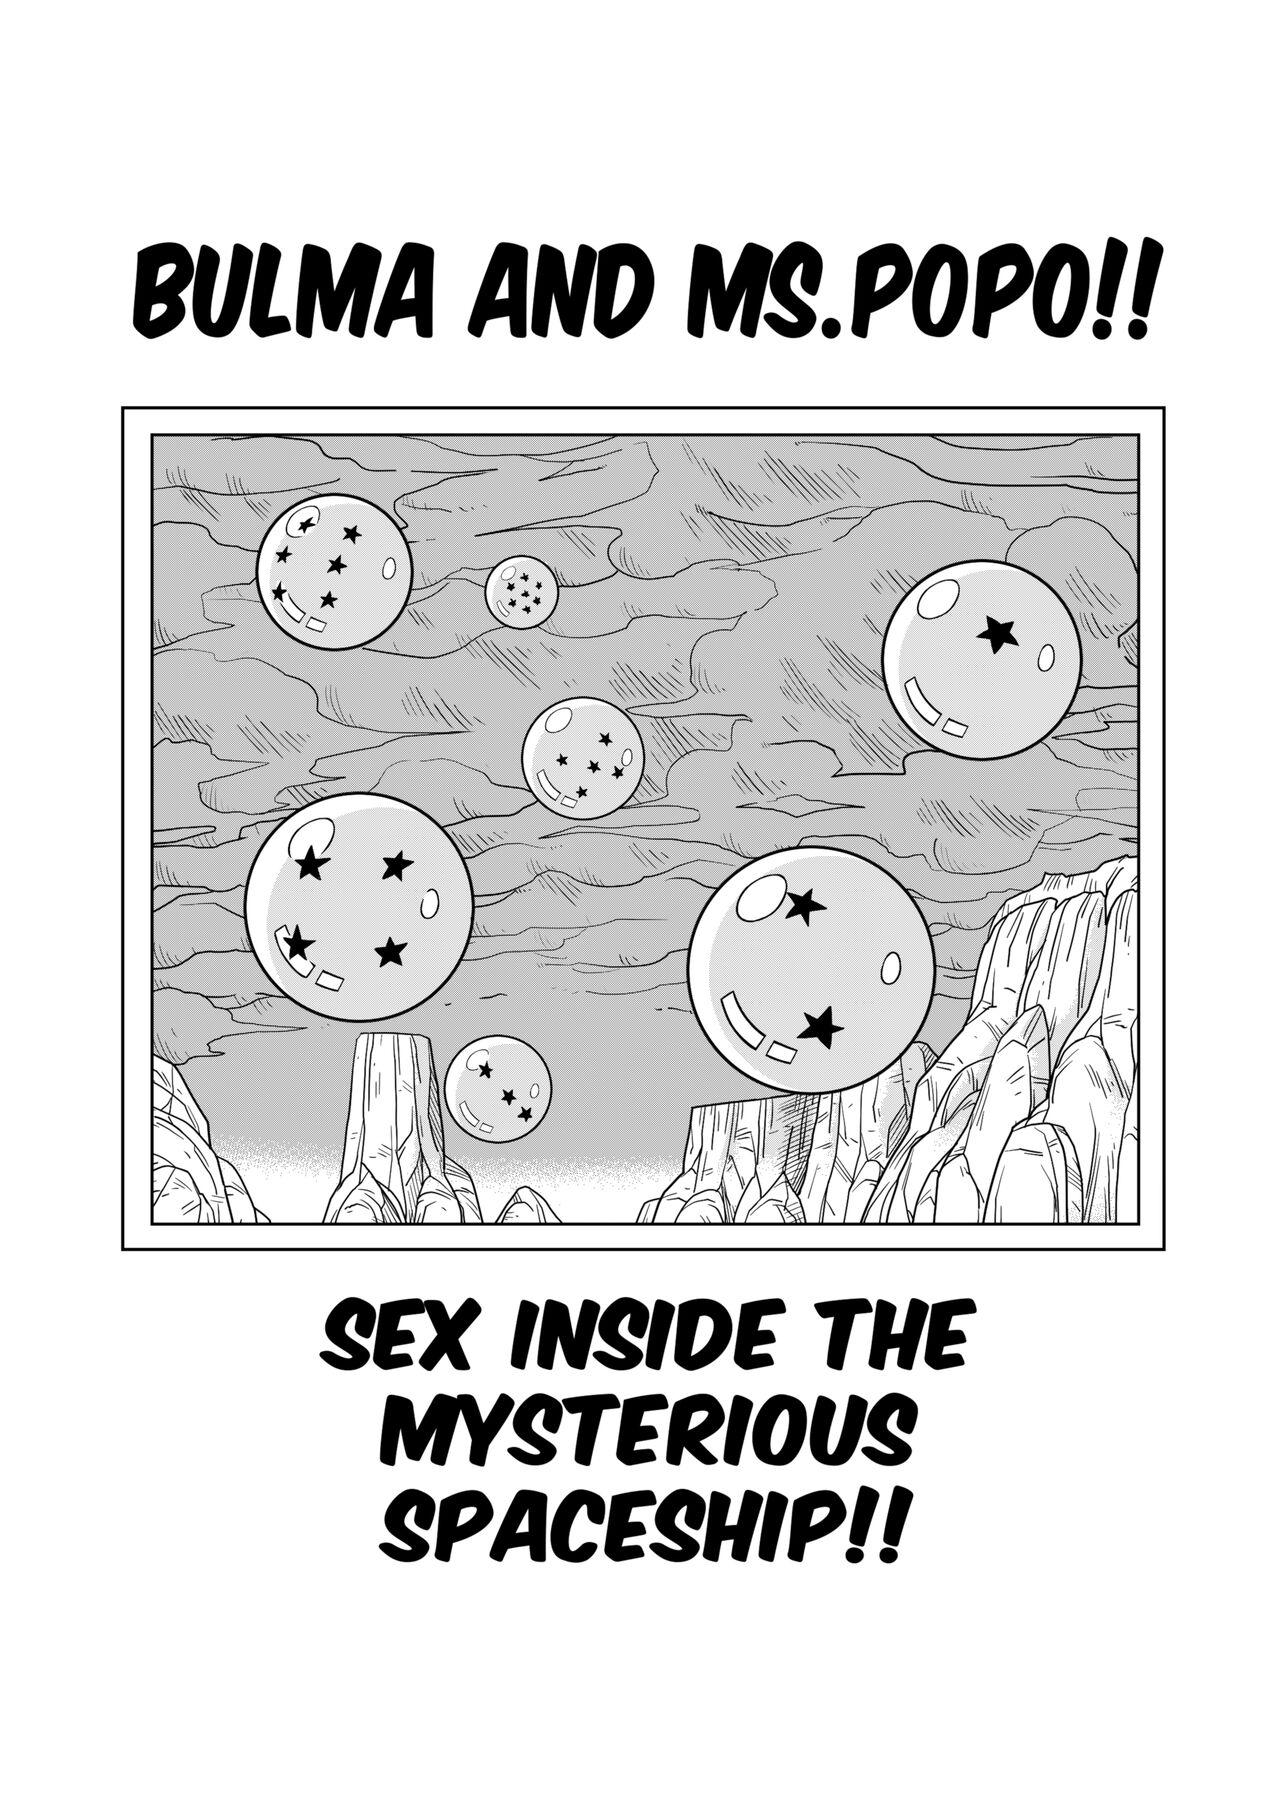 Fodendo Bulma Meets Mr.Popo - Sex inside the Mysterious Spaceship! - Dragon ball z Cheerleader - Page 4